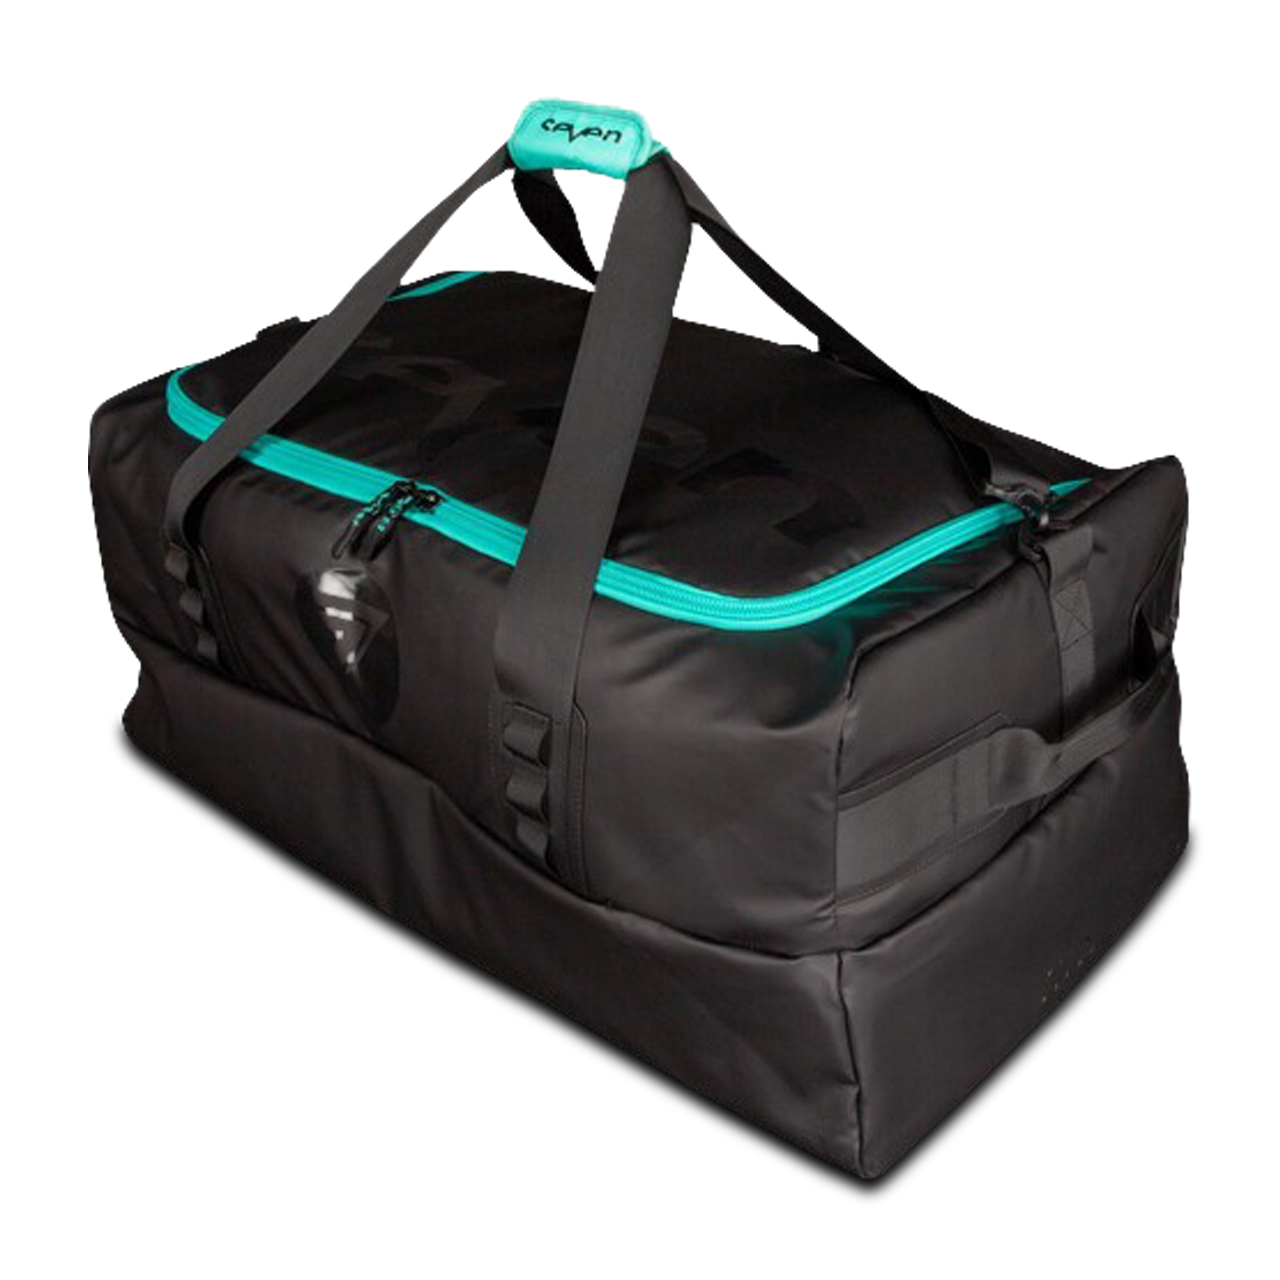 Amazon.com : Endless Mardi Gras Vortex Cooler Bag Insulated Cooler Lunch  Box Waterproof Tote Bag for Camping Travel : Sports & Outdoors